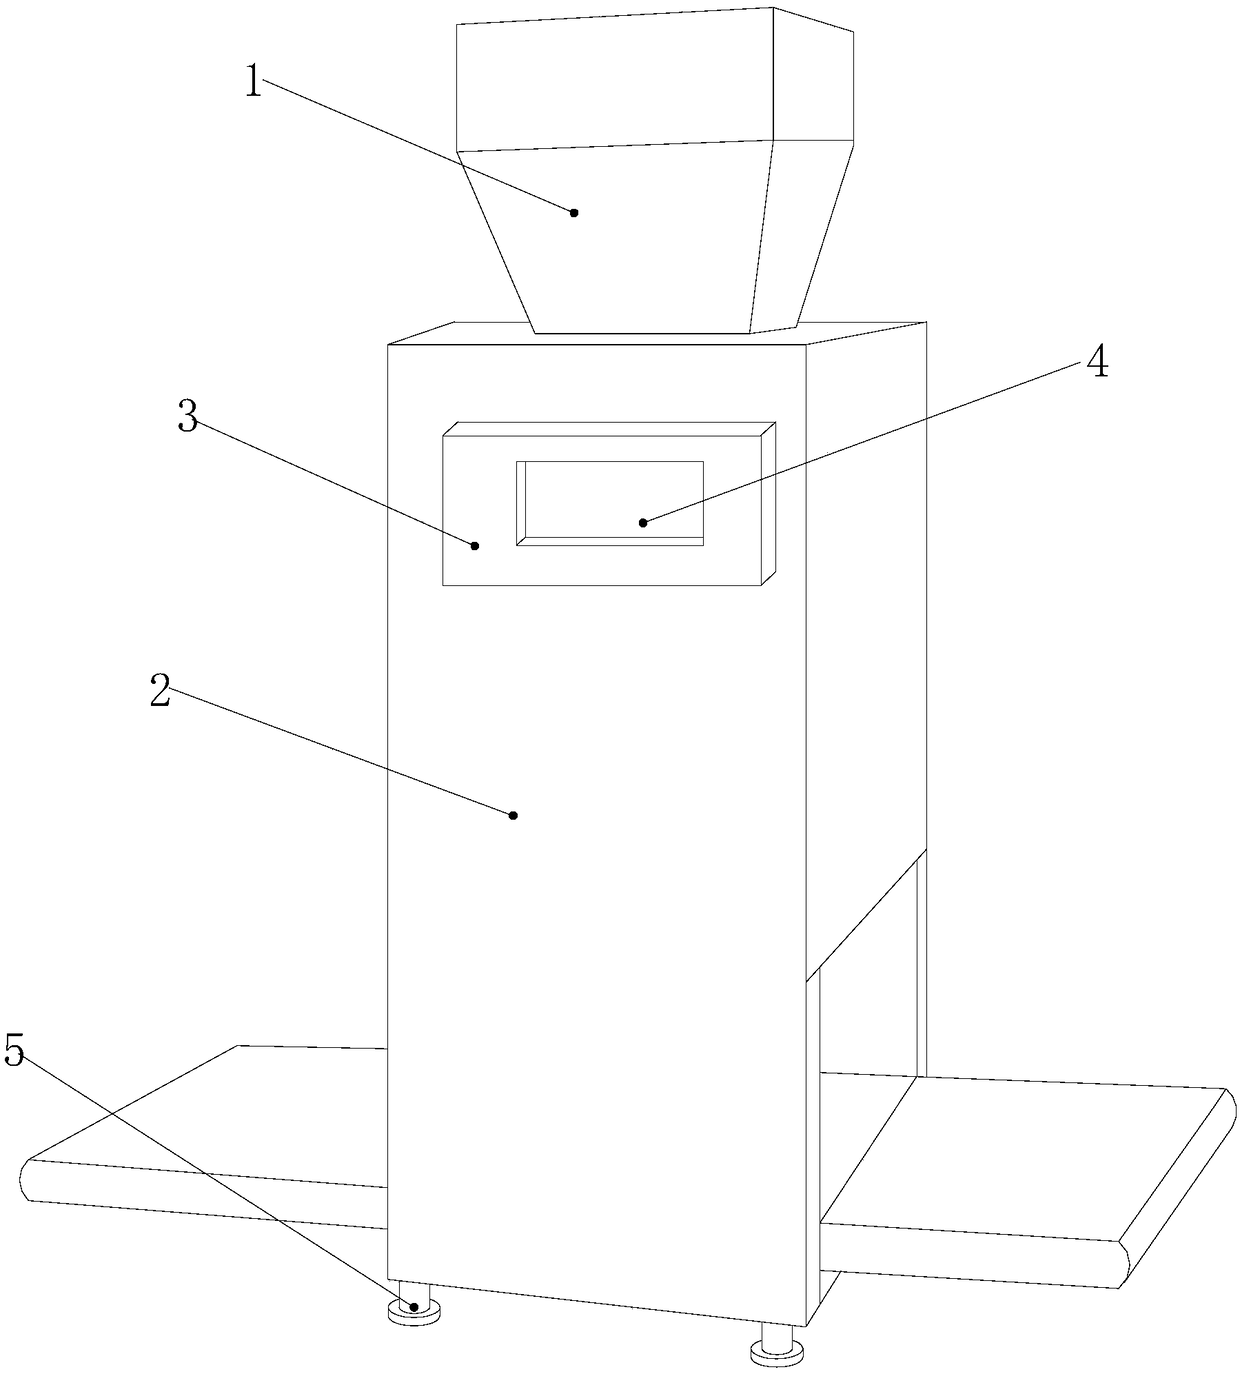 Automatic sub-packaging device for food packaging